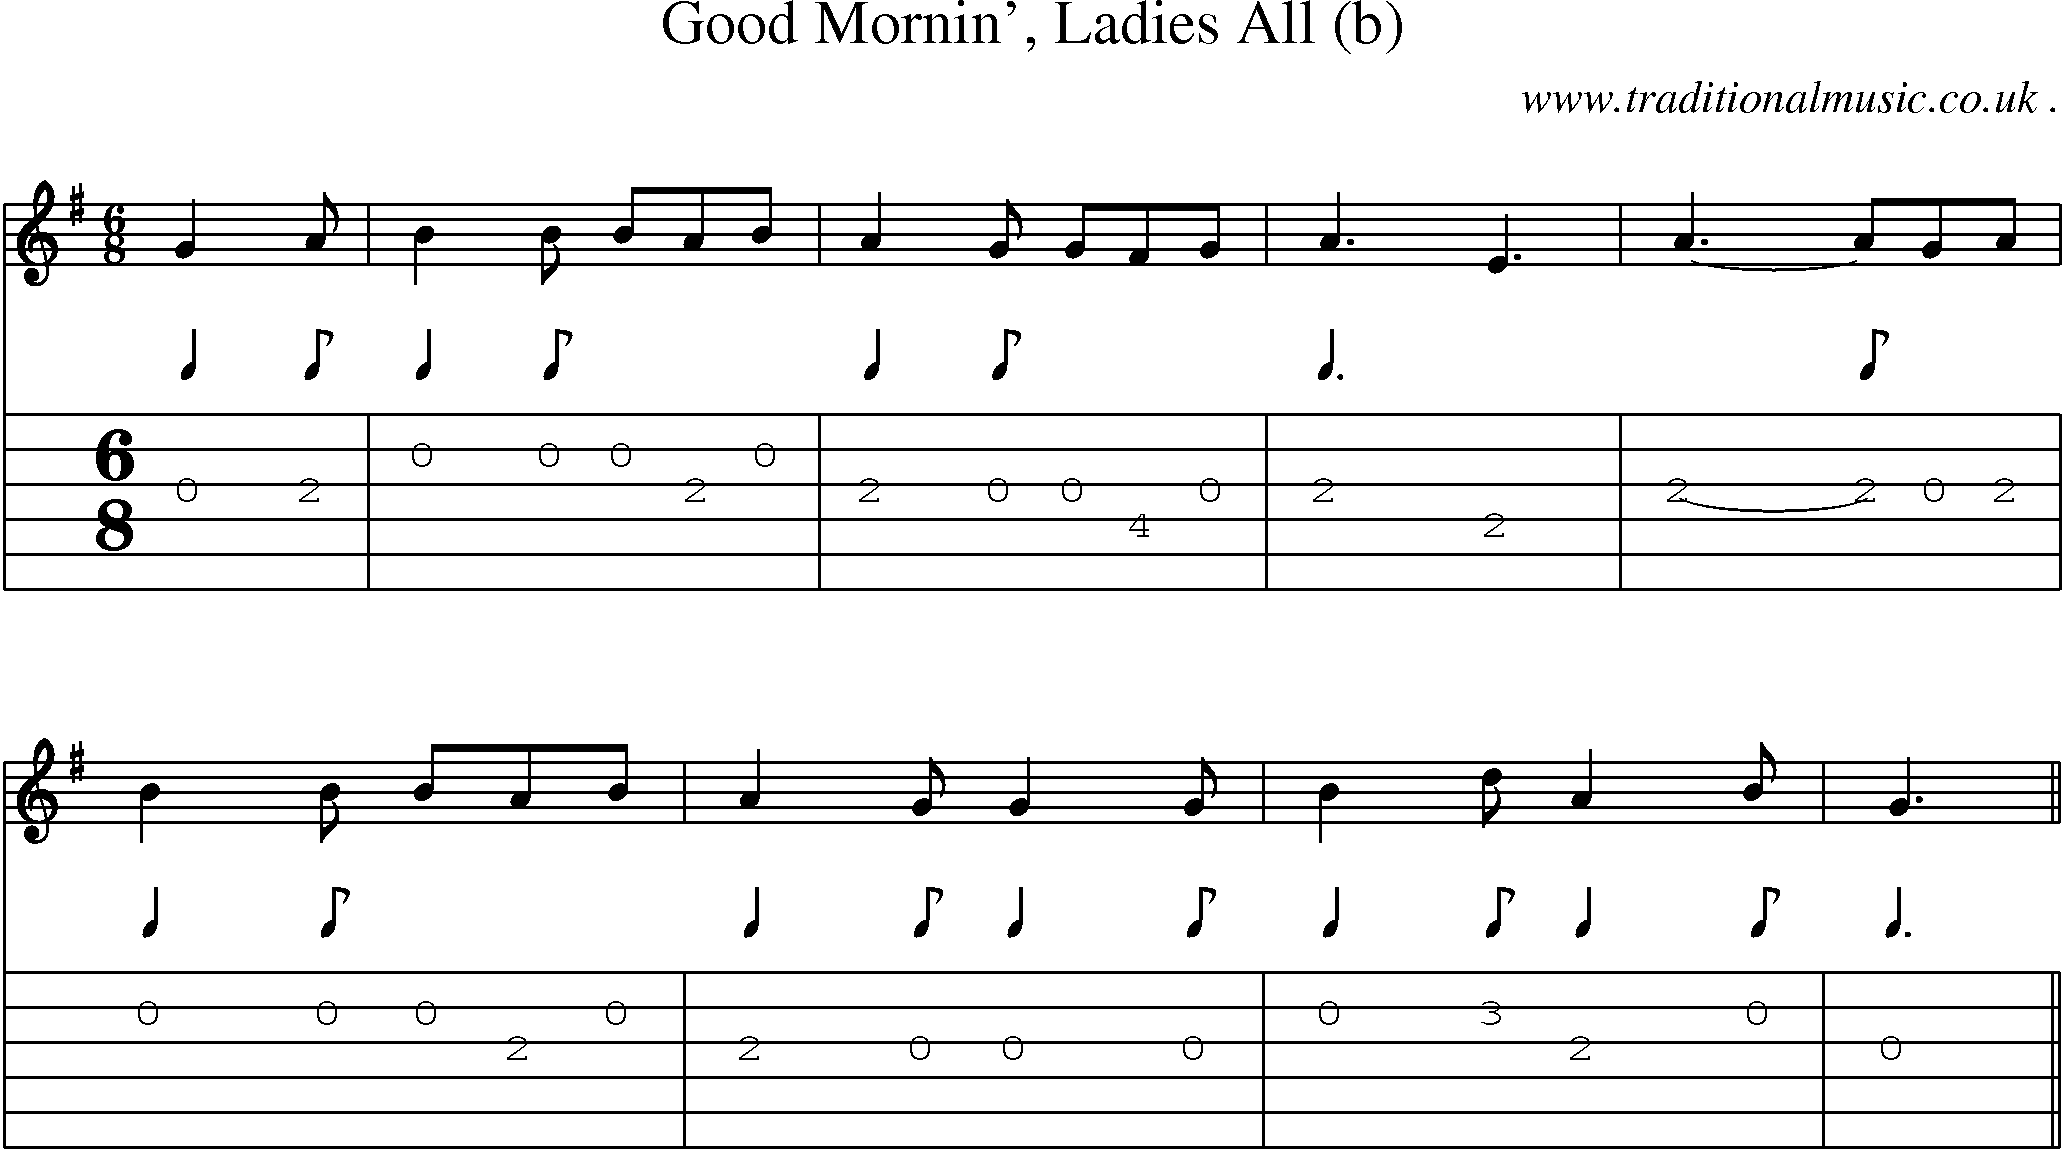 Sheet-Music and Guitar Tabs for Good Mornin Ladies All (b)